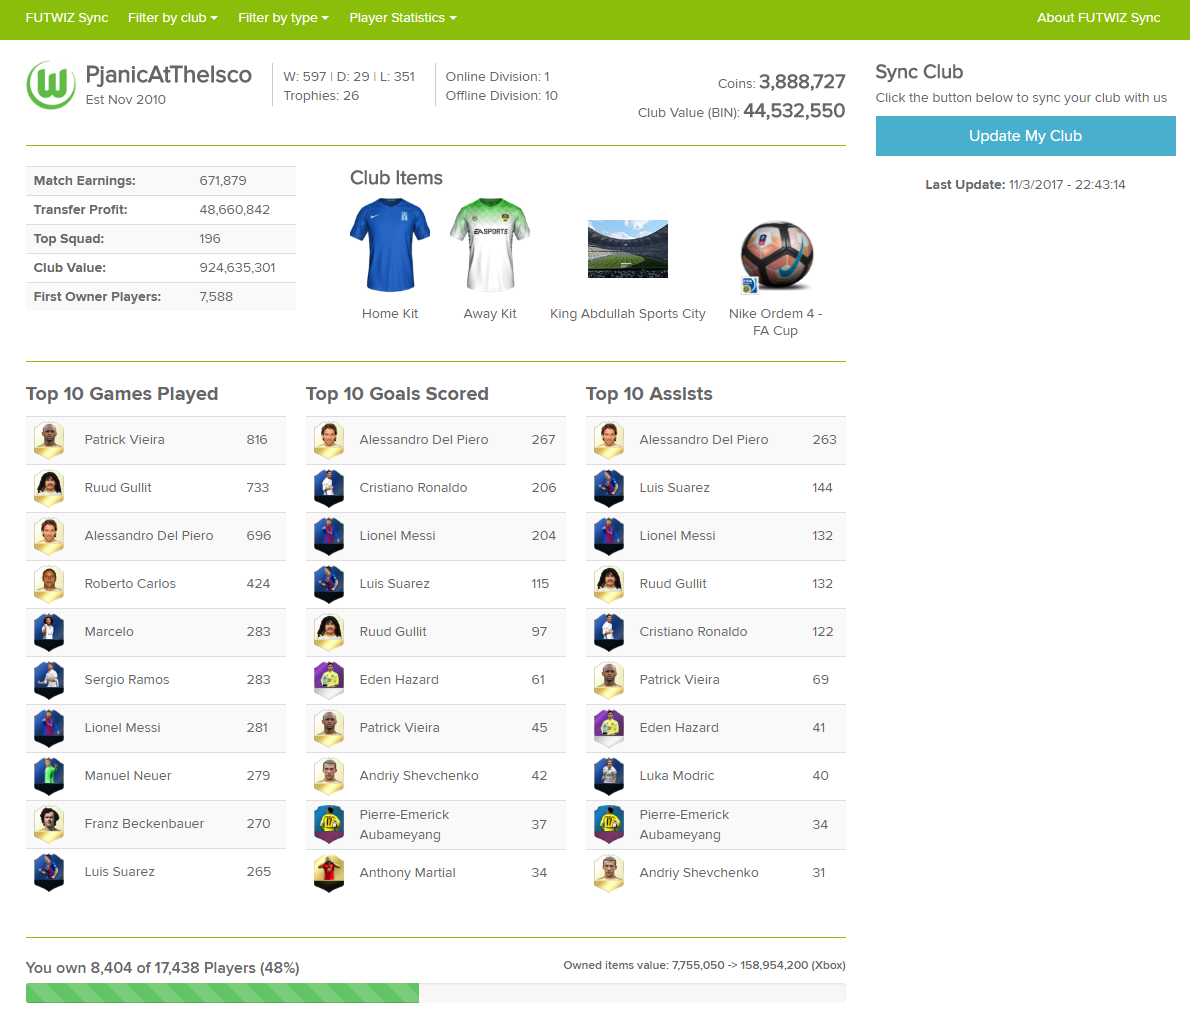 Fifa 14 - Free Coin Generator For Ultimate Team.